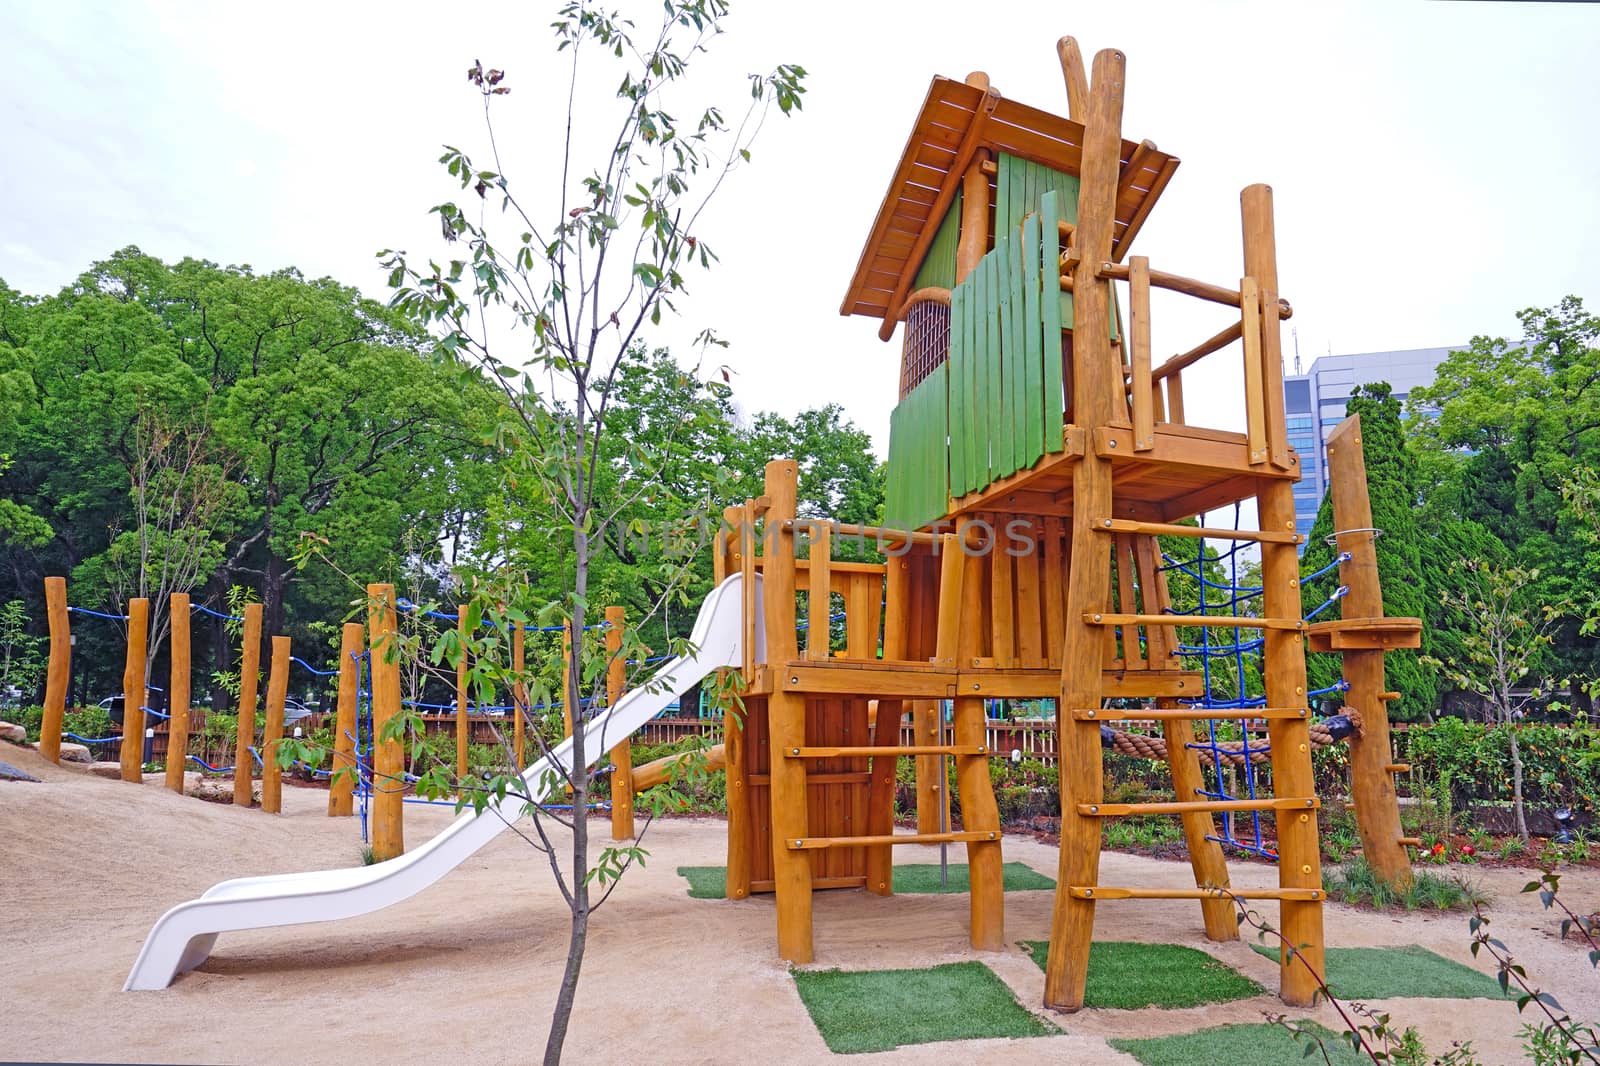 Colorful children slide equipment in Japan outdoor playround by cougarsan